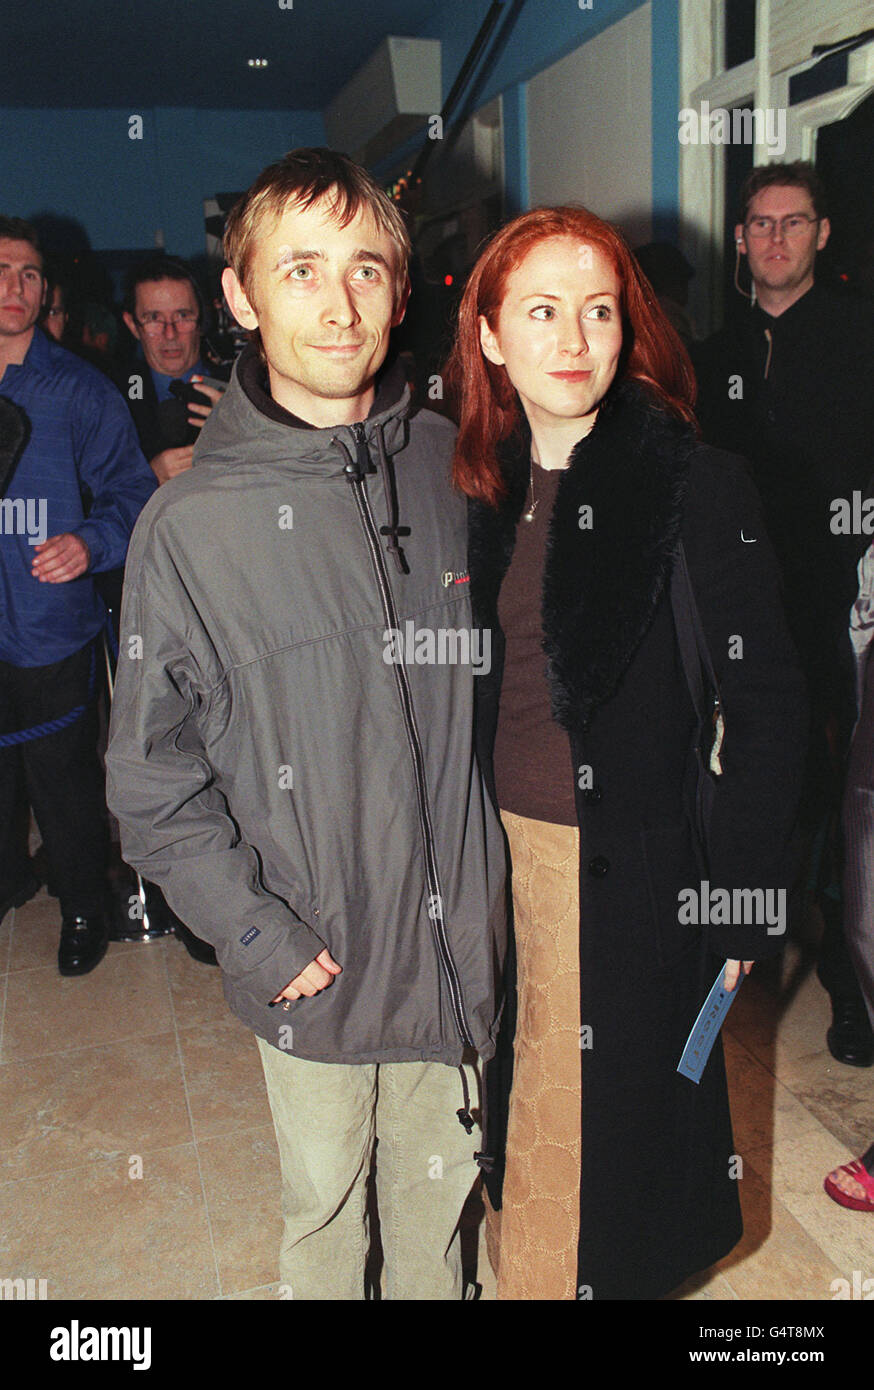 Neil Hannon, lead singer of band The Divine Comedy, with his wife Orla, at the opening party for the Sugar Reef Bar and Grill, in Soho, London. Stock Photo